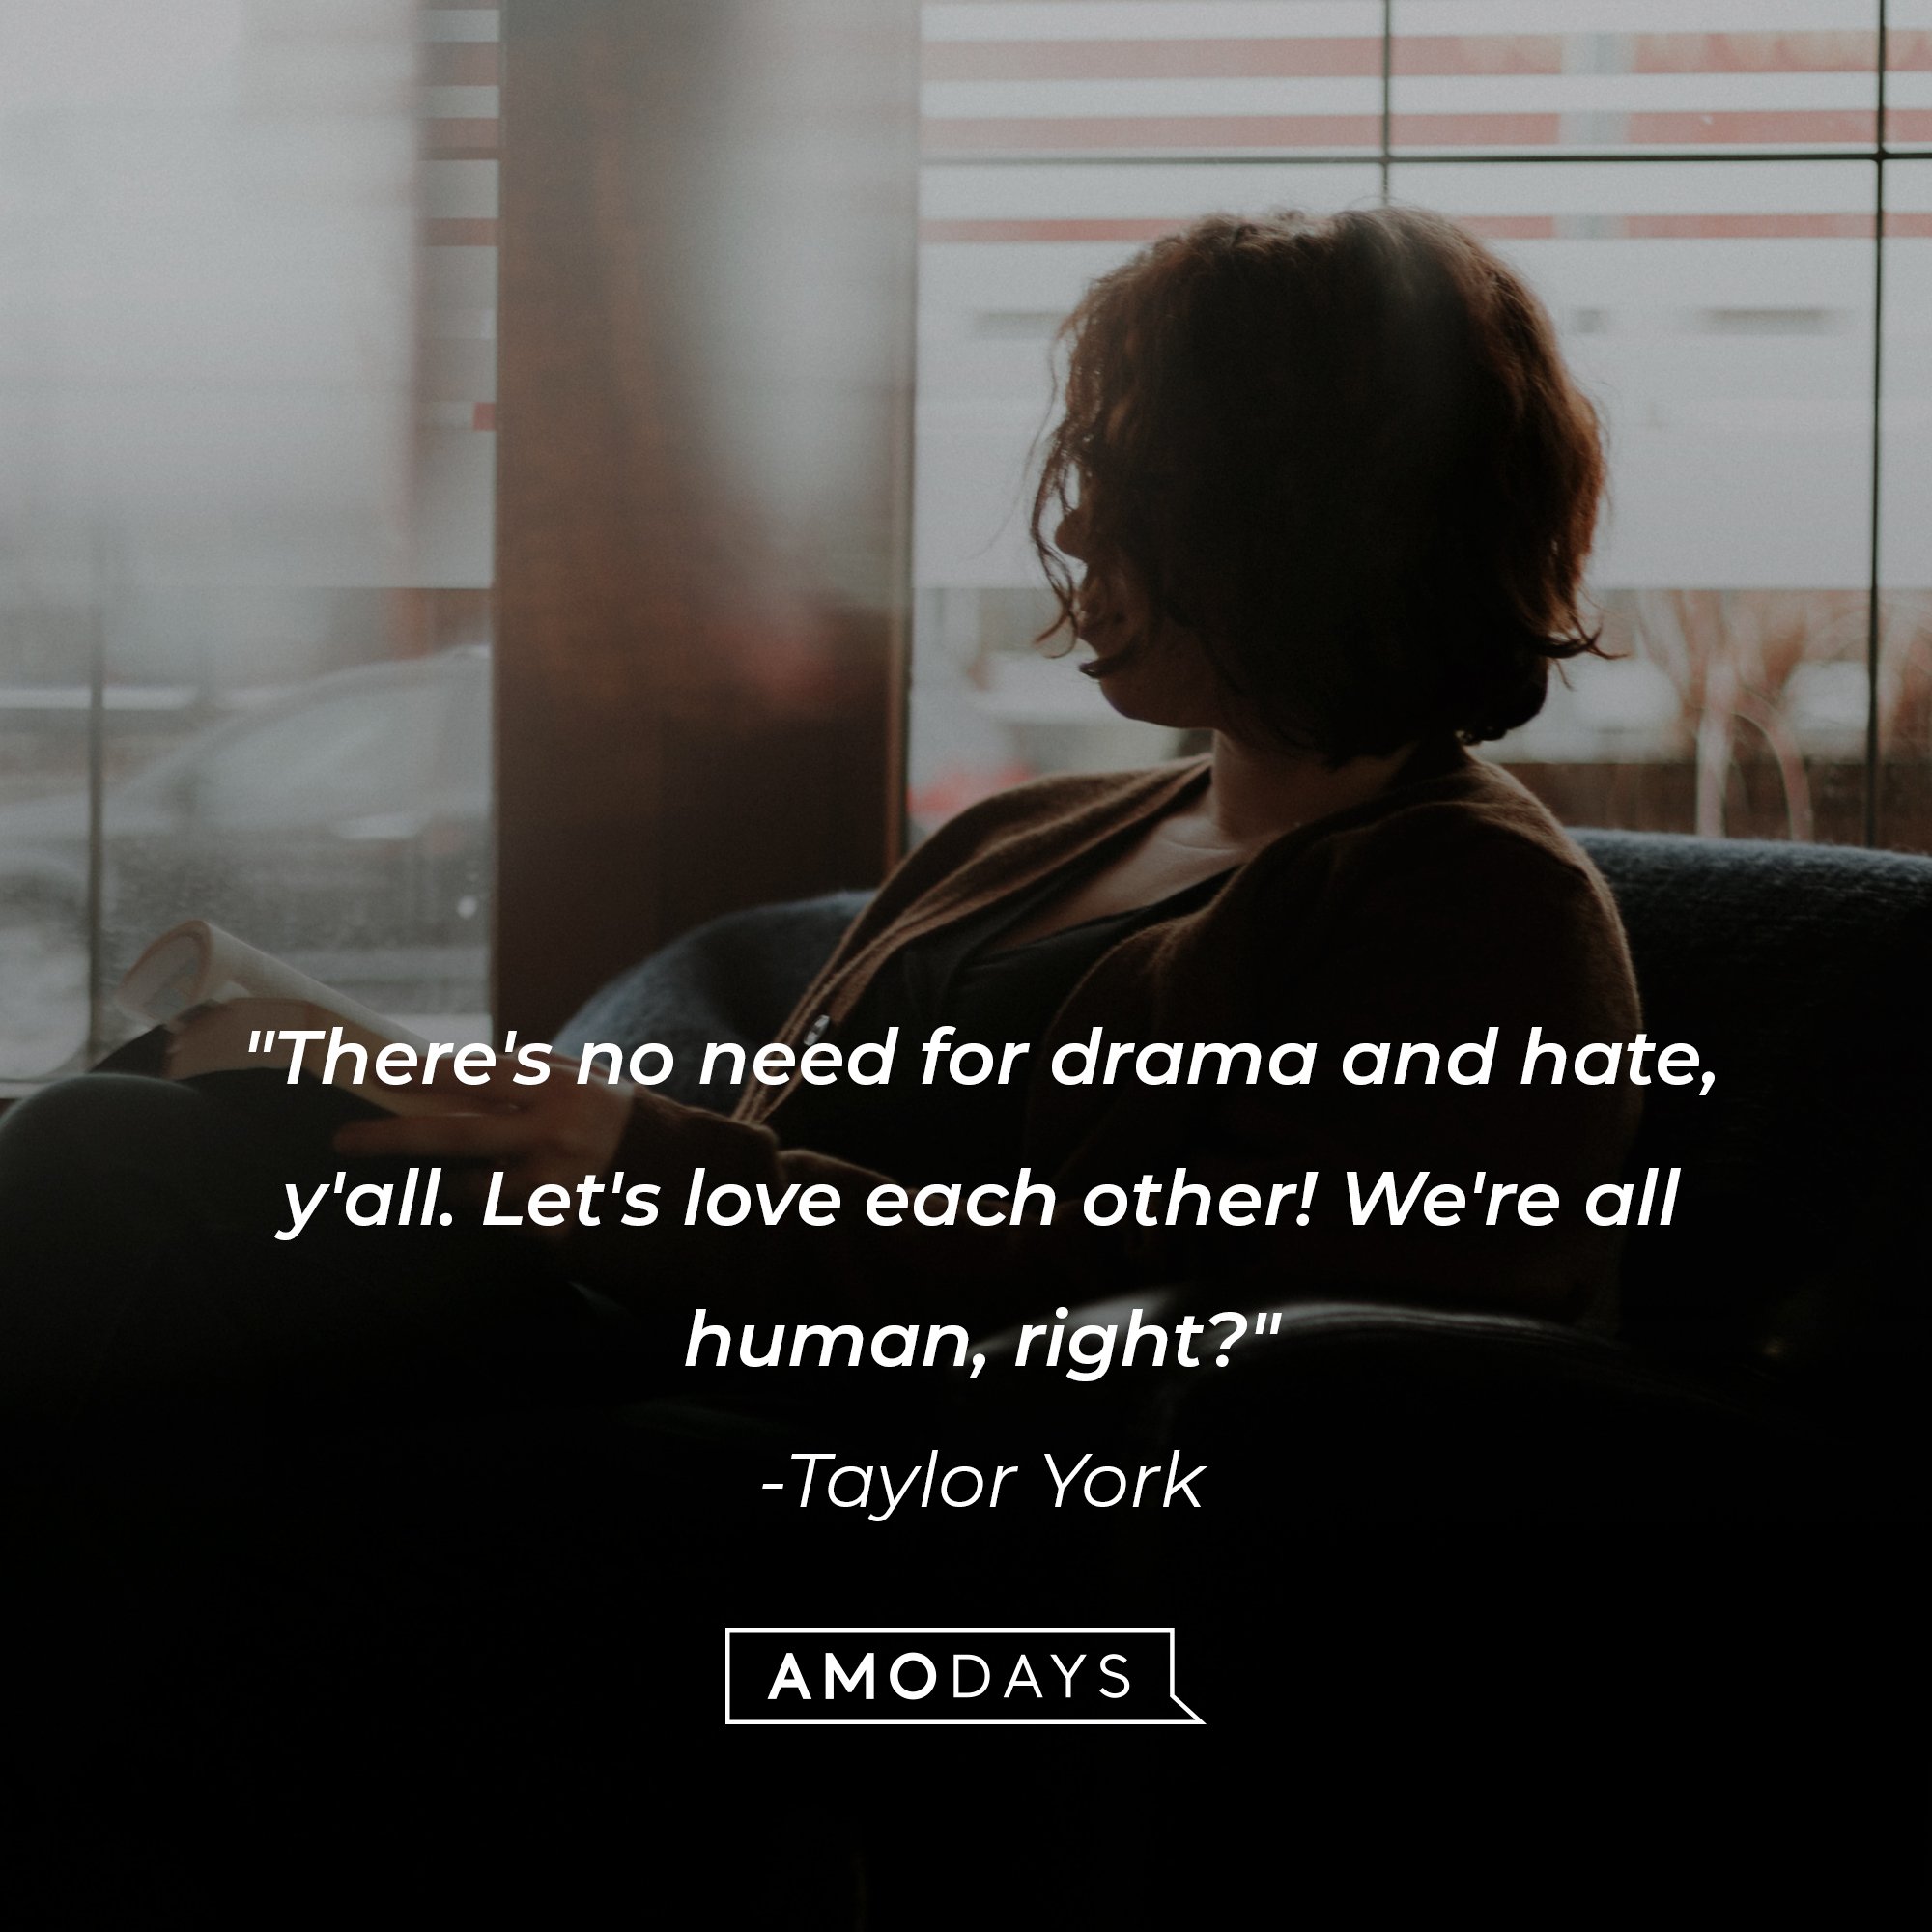 Taylor York’s quote: "There's no need for drama and hate, y'all. Let's love each other! We're all human, right?" | Image: AmoDays